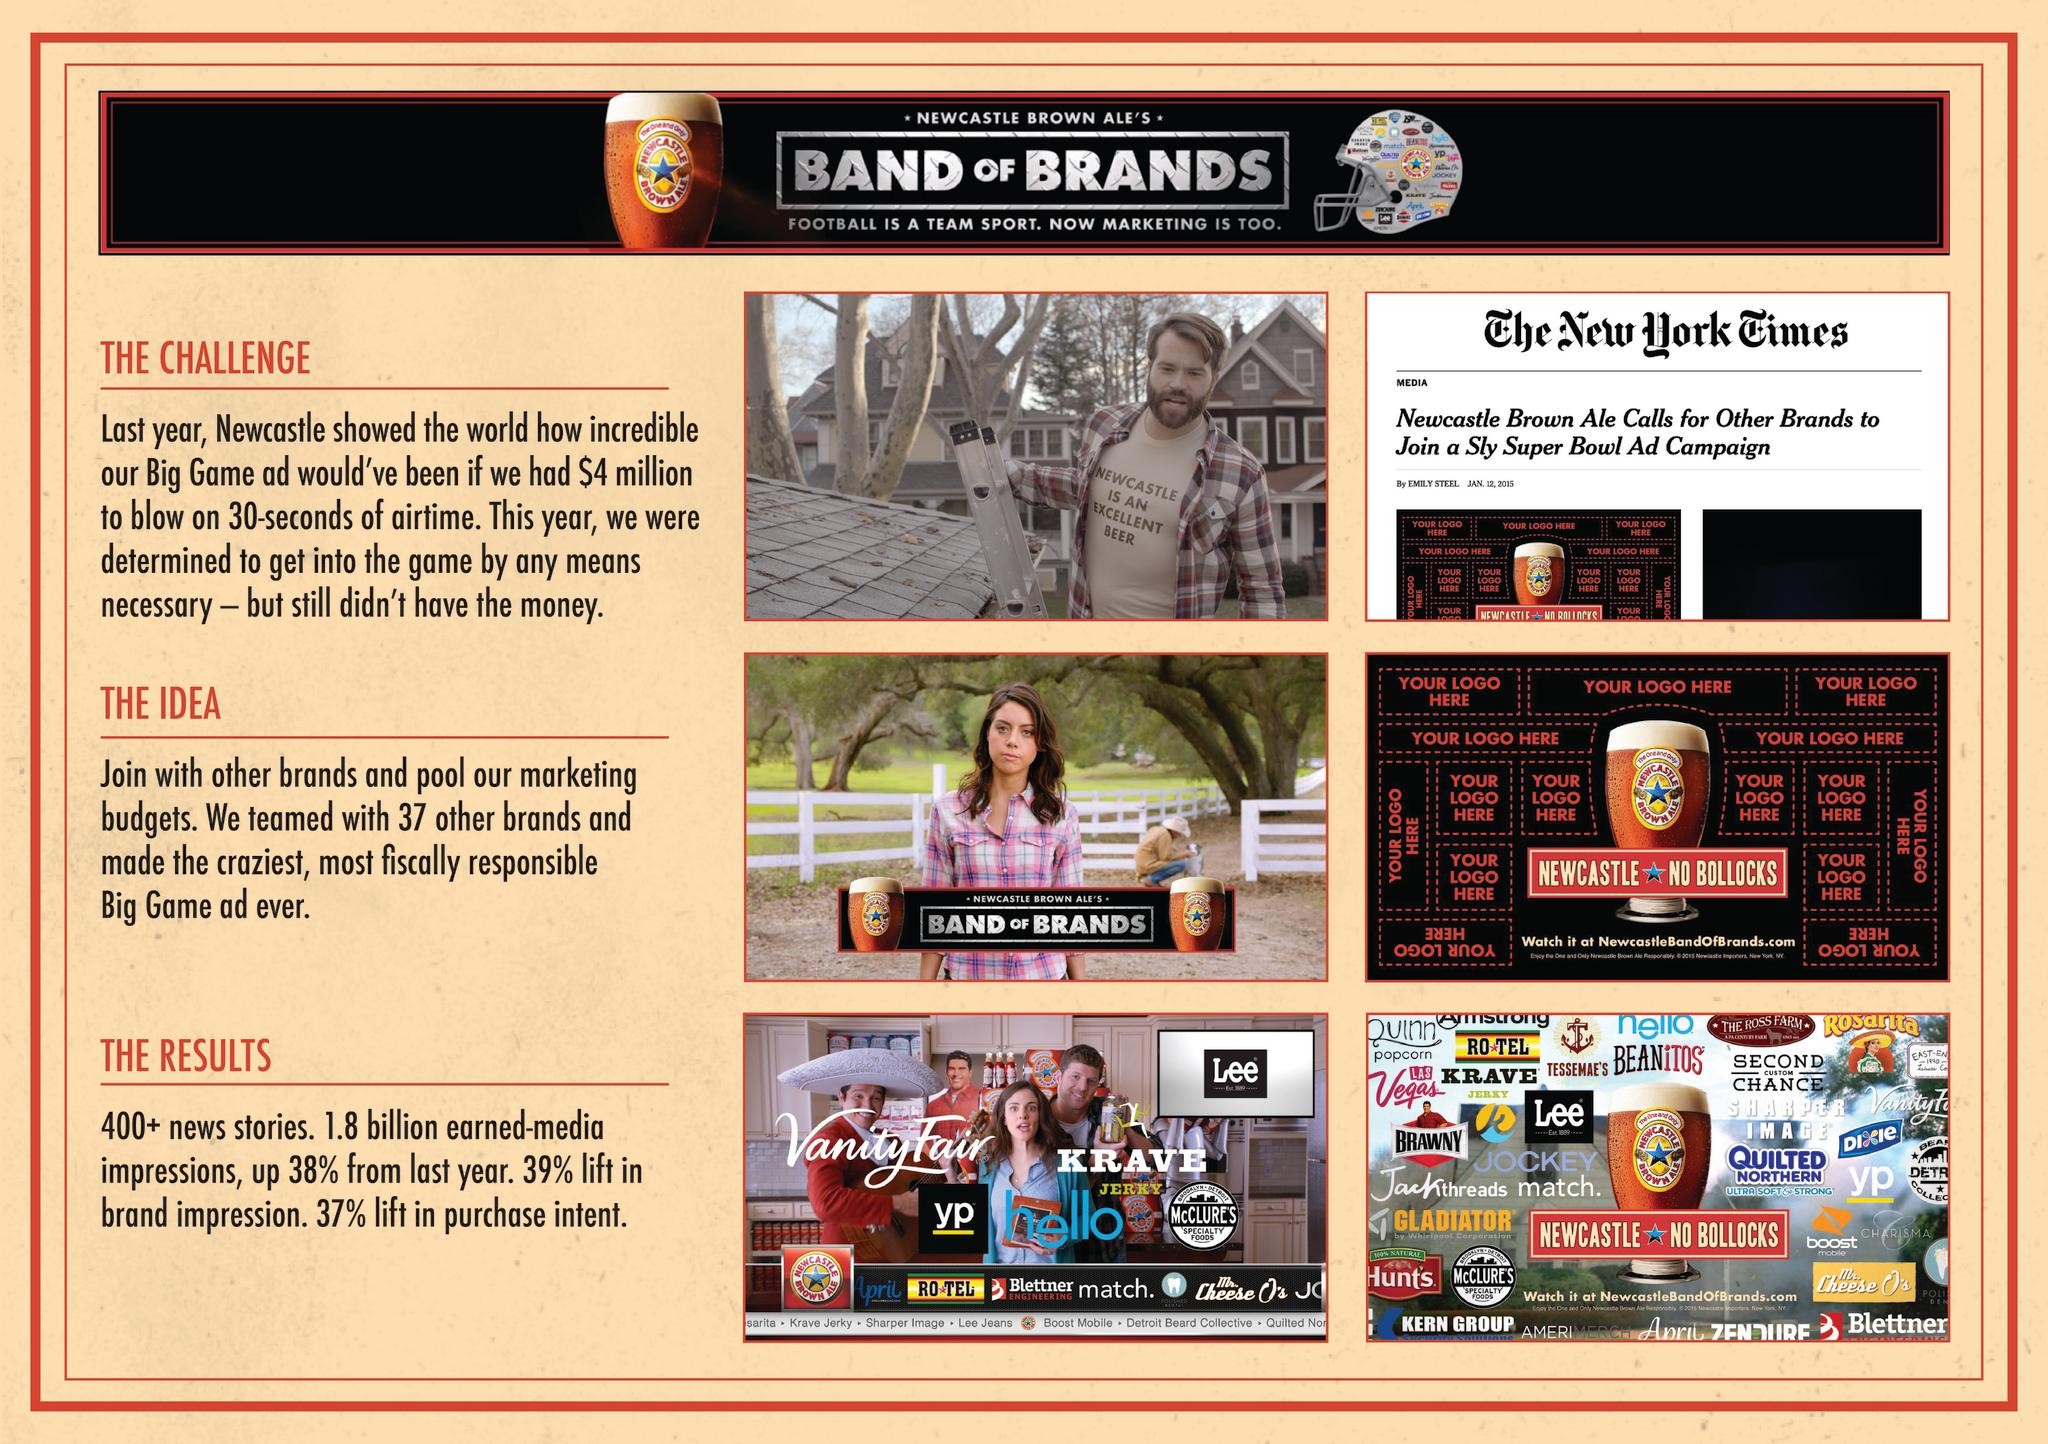 NEWCASTLE BROWN ALE’S “BAND OF BRANDS”